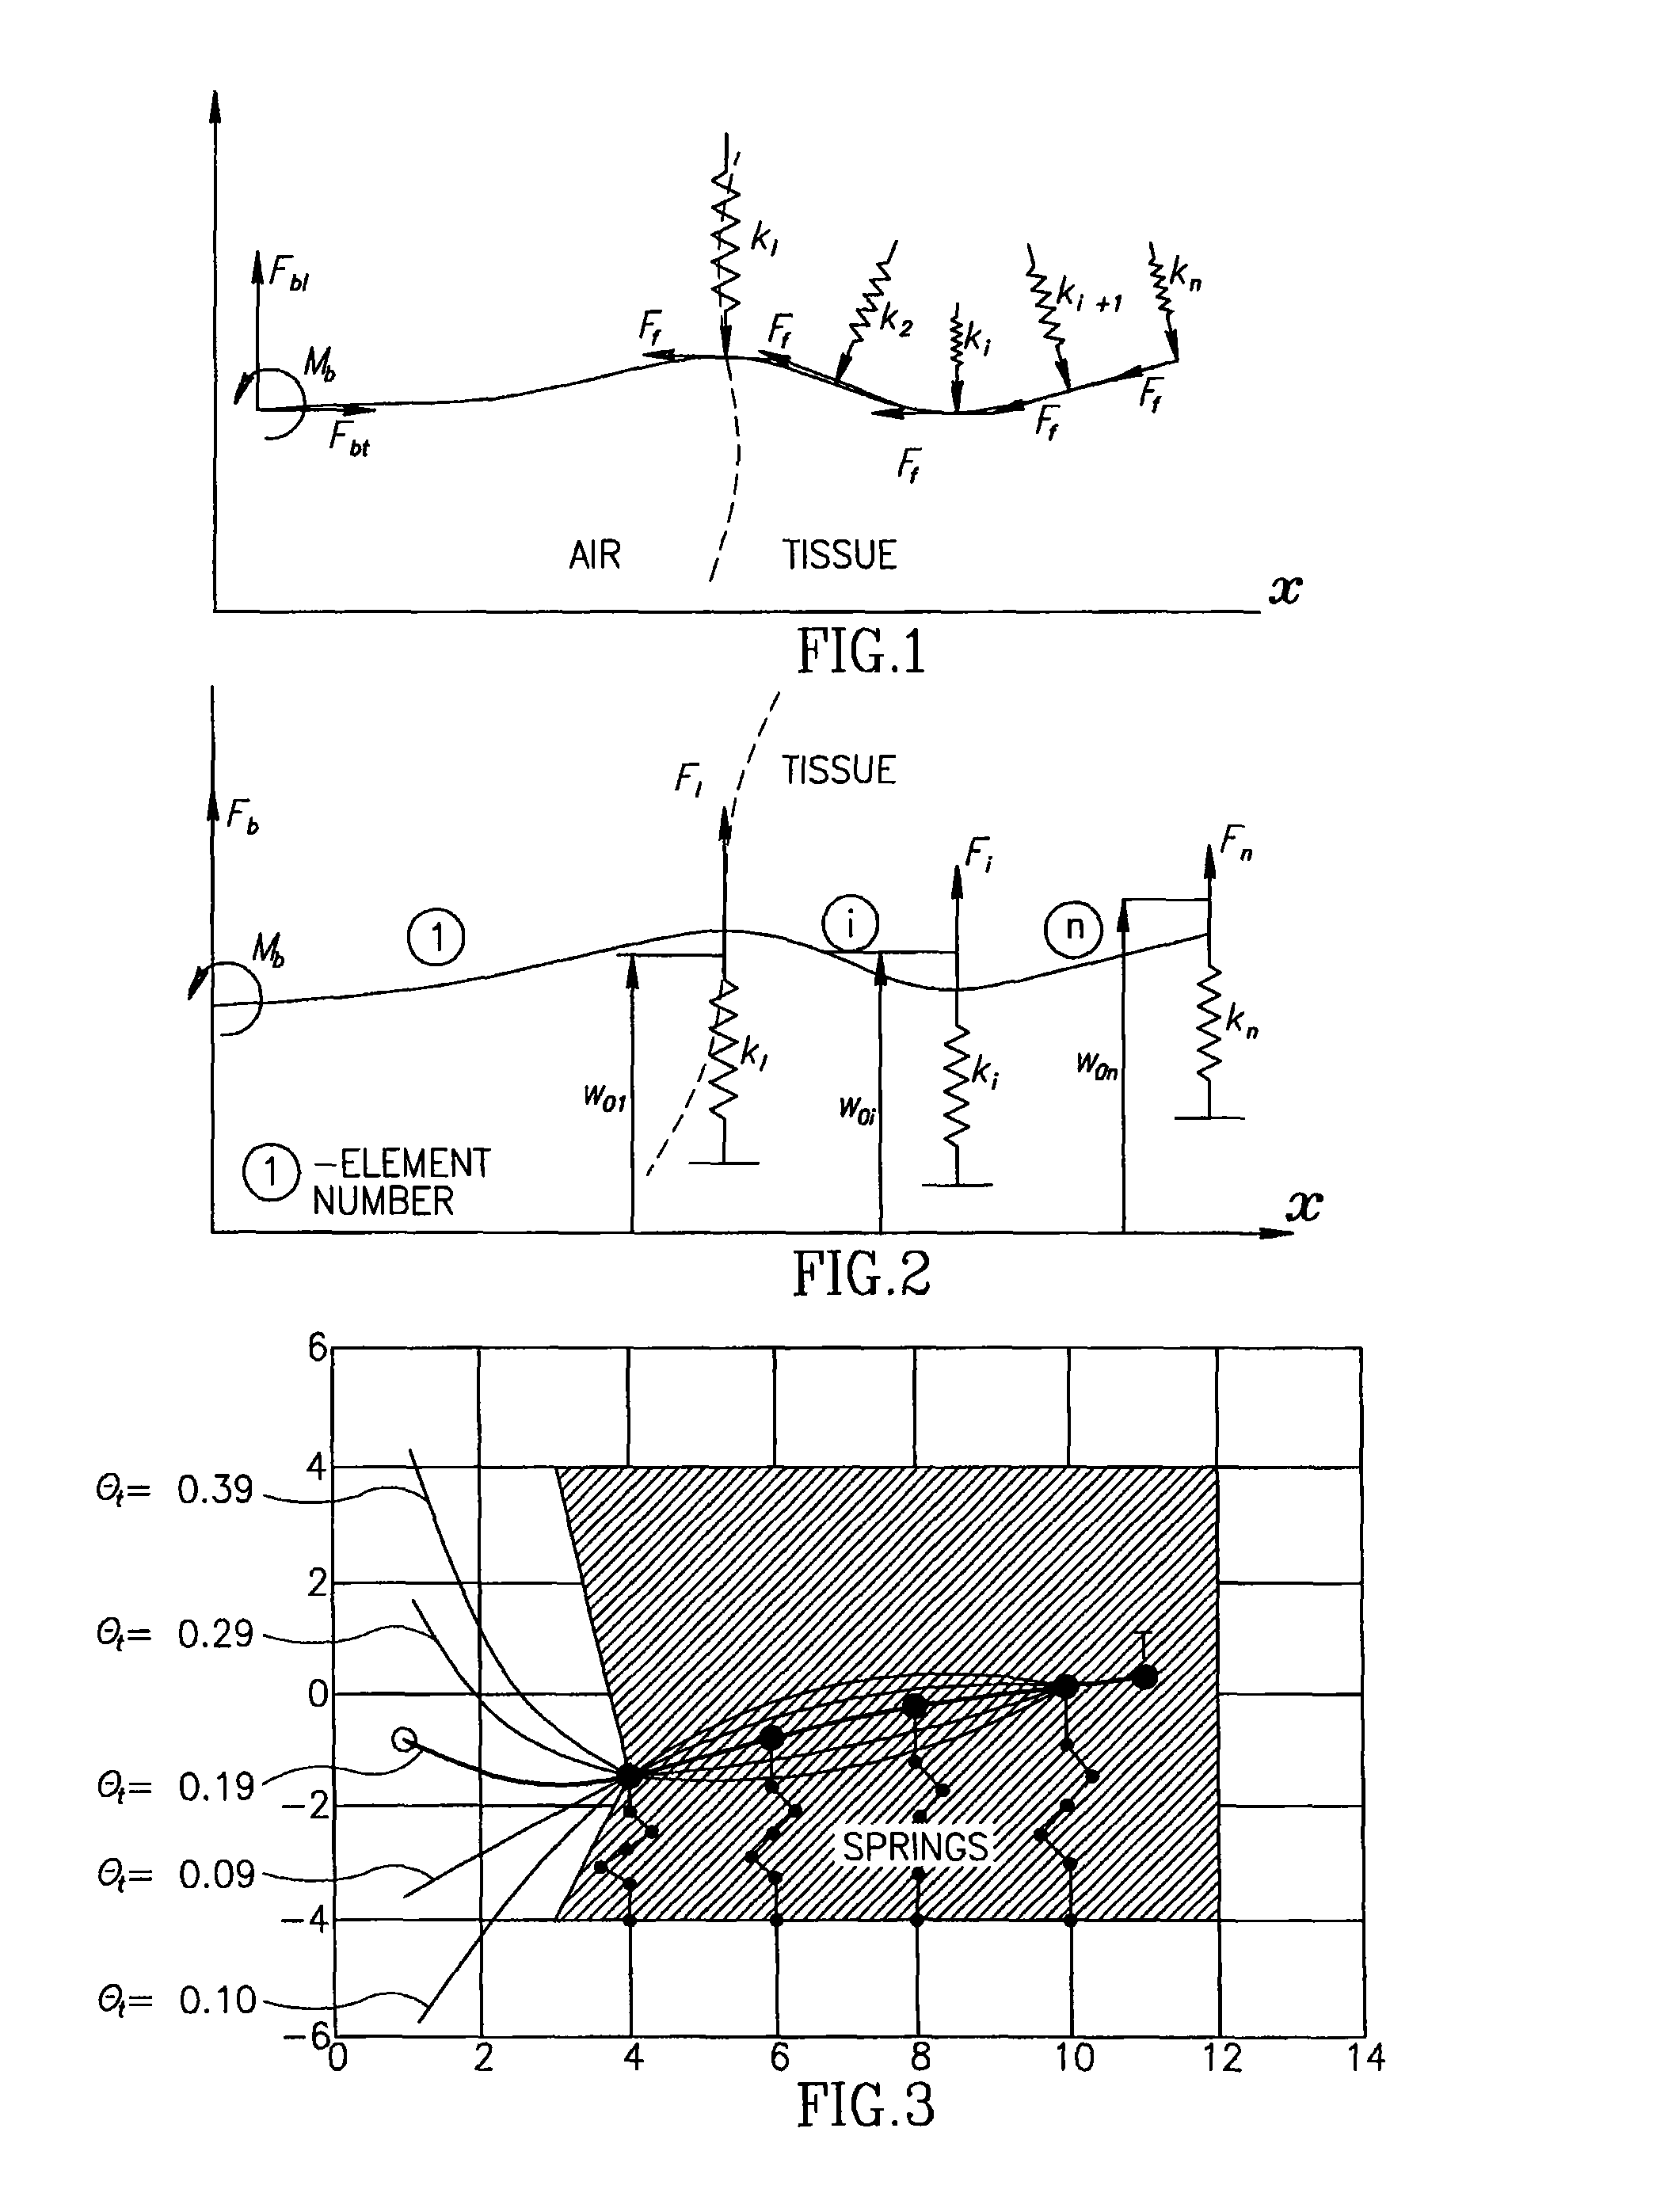 Controlled steering of a flexible needle